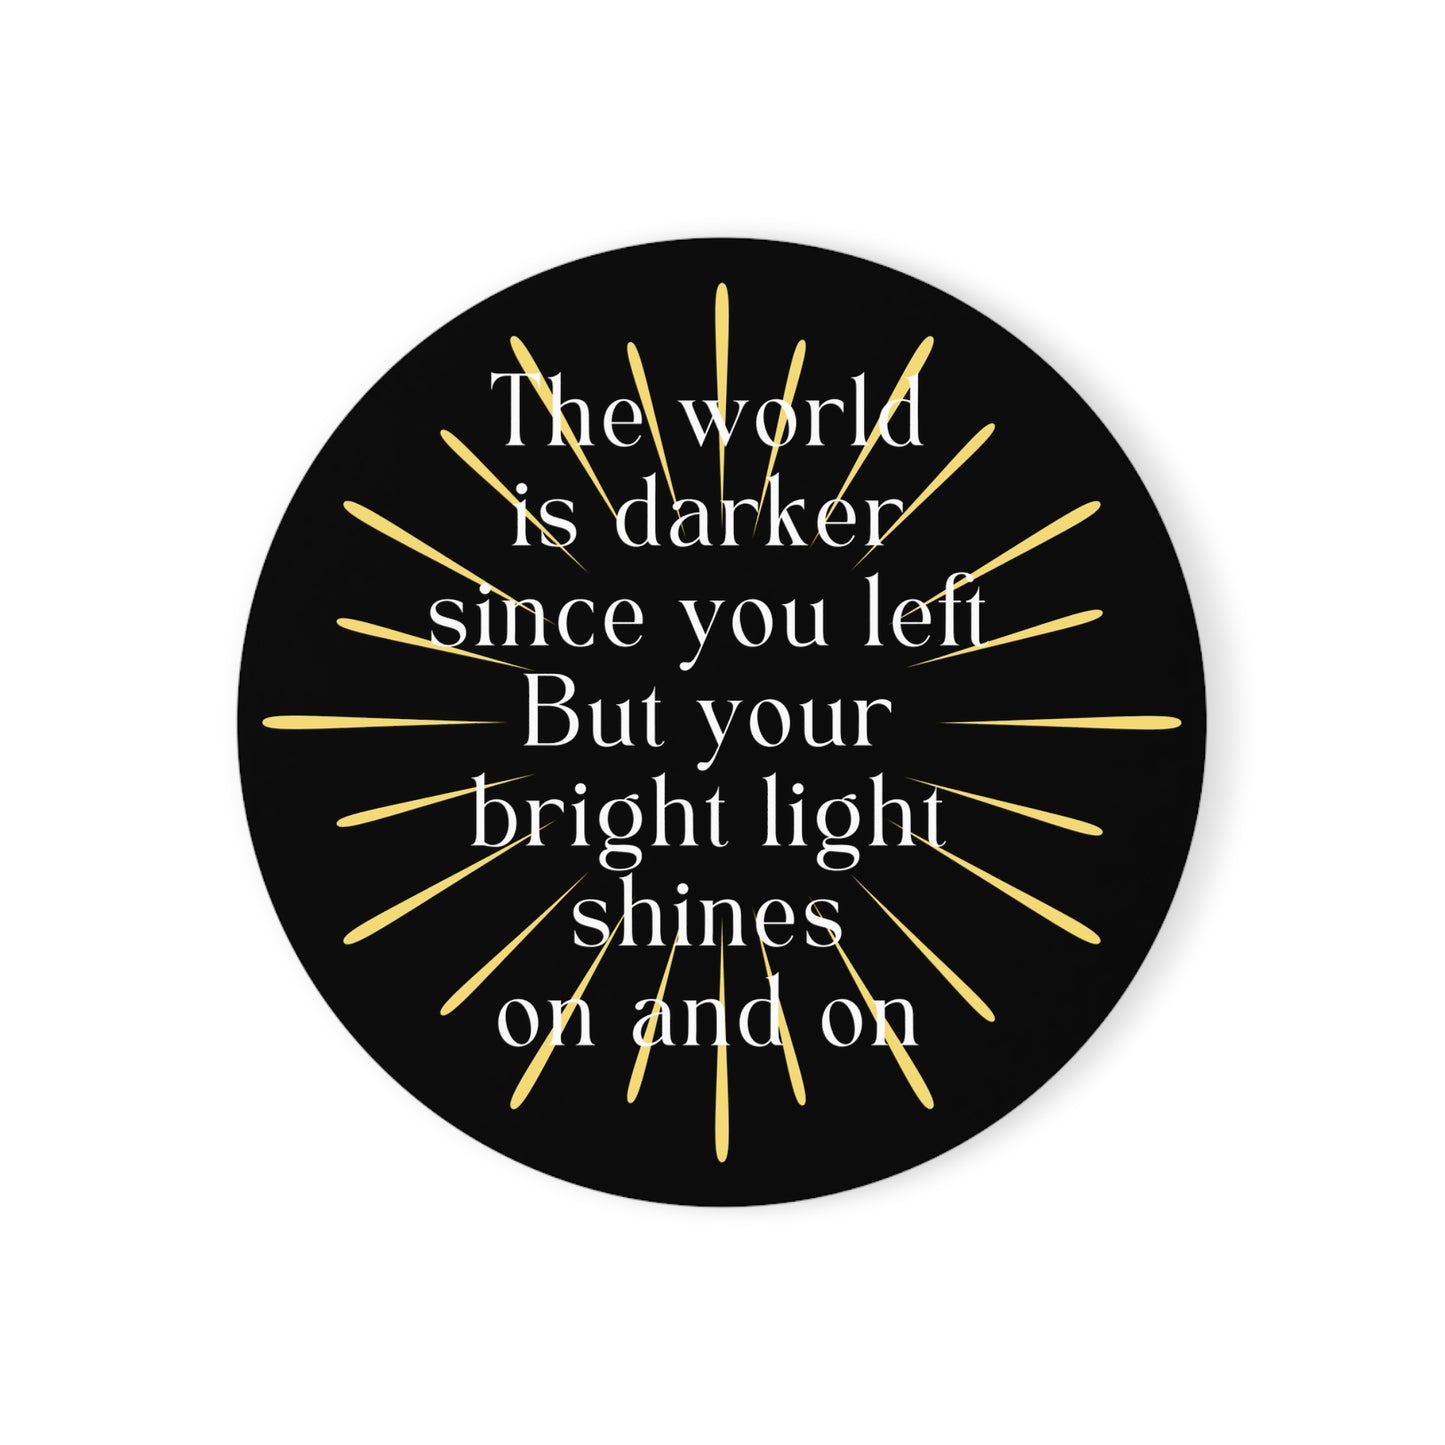 Coaster for Candles, Mugs, Glasses, The World Is Darker Since You Left